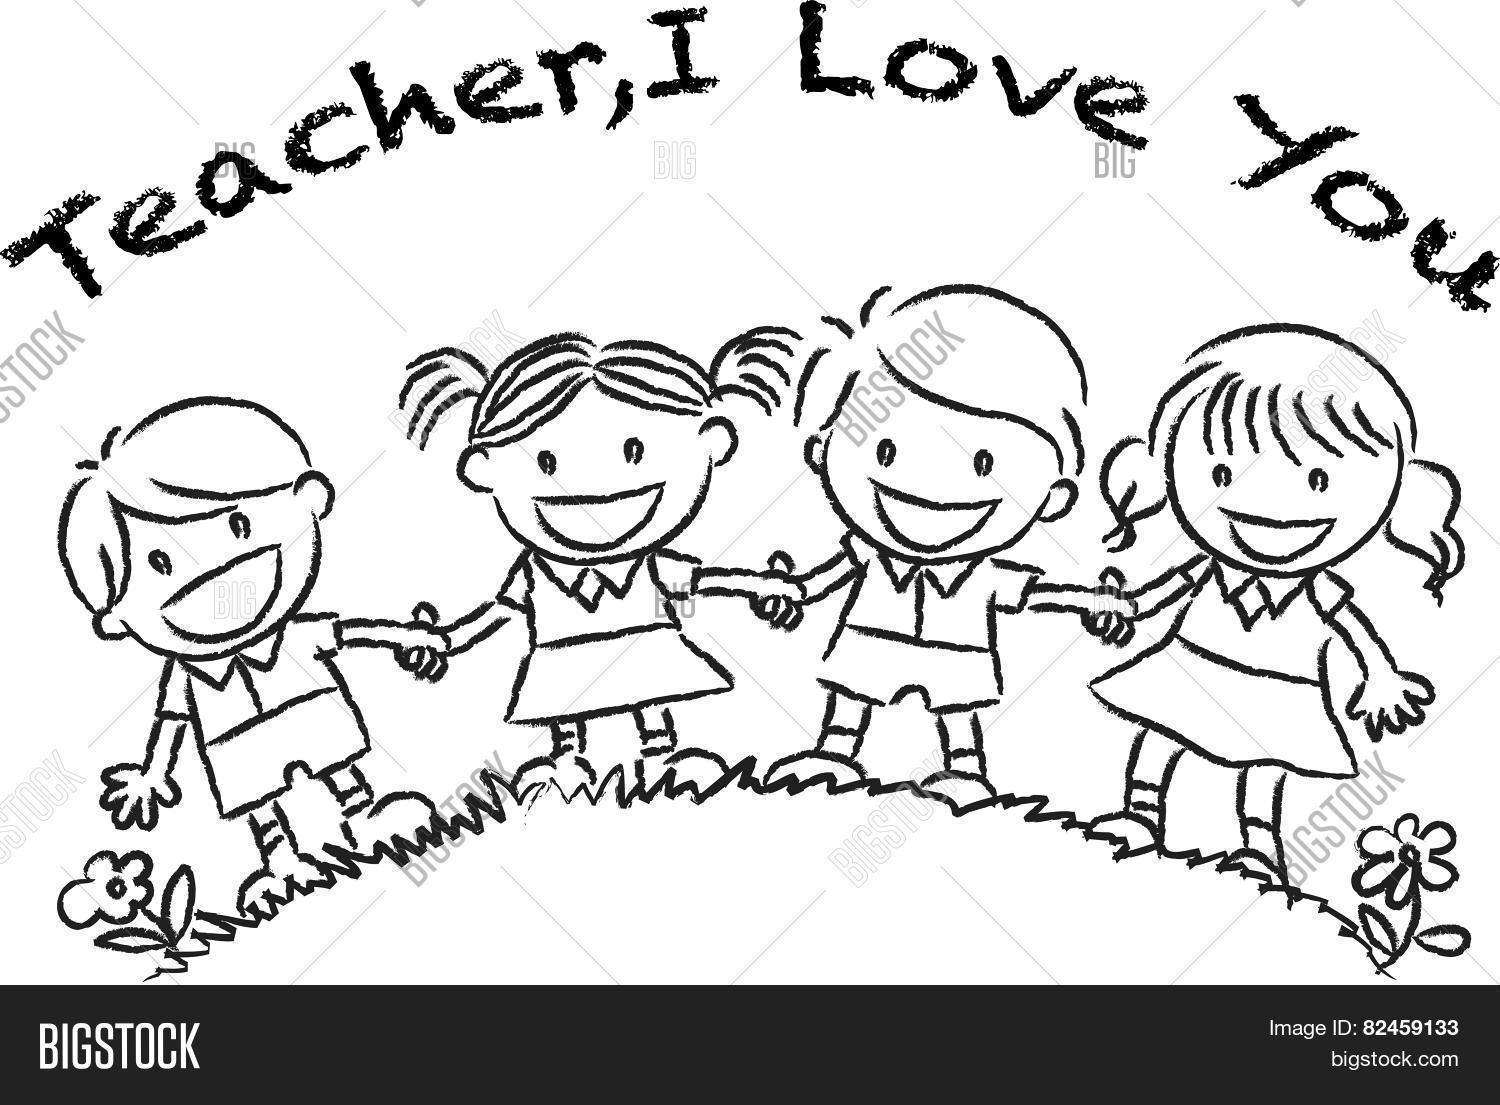 Teachers Day Coloring Pages at GetDrawings | Free download